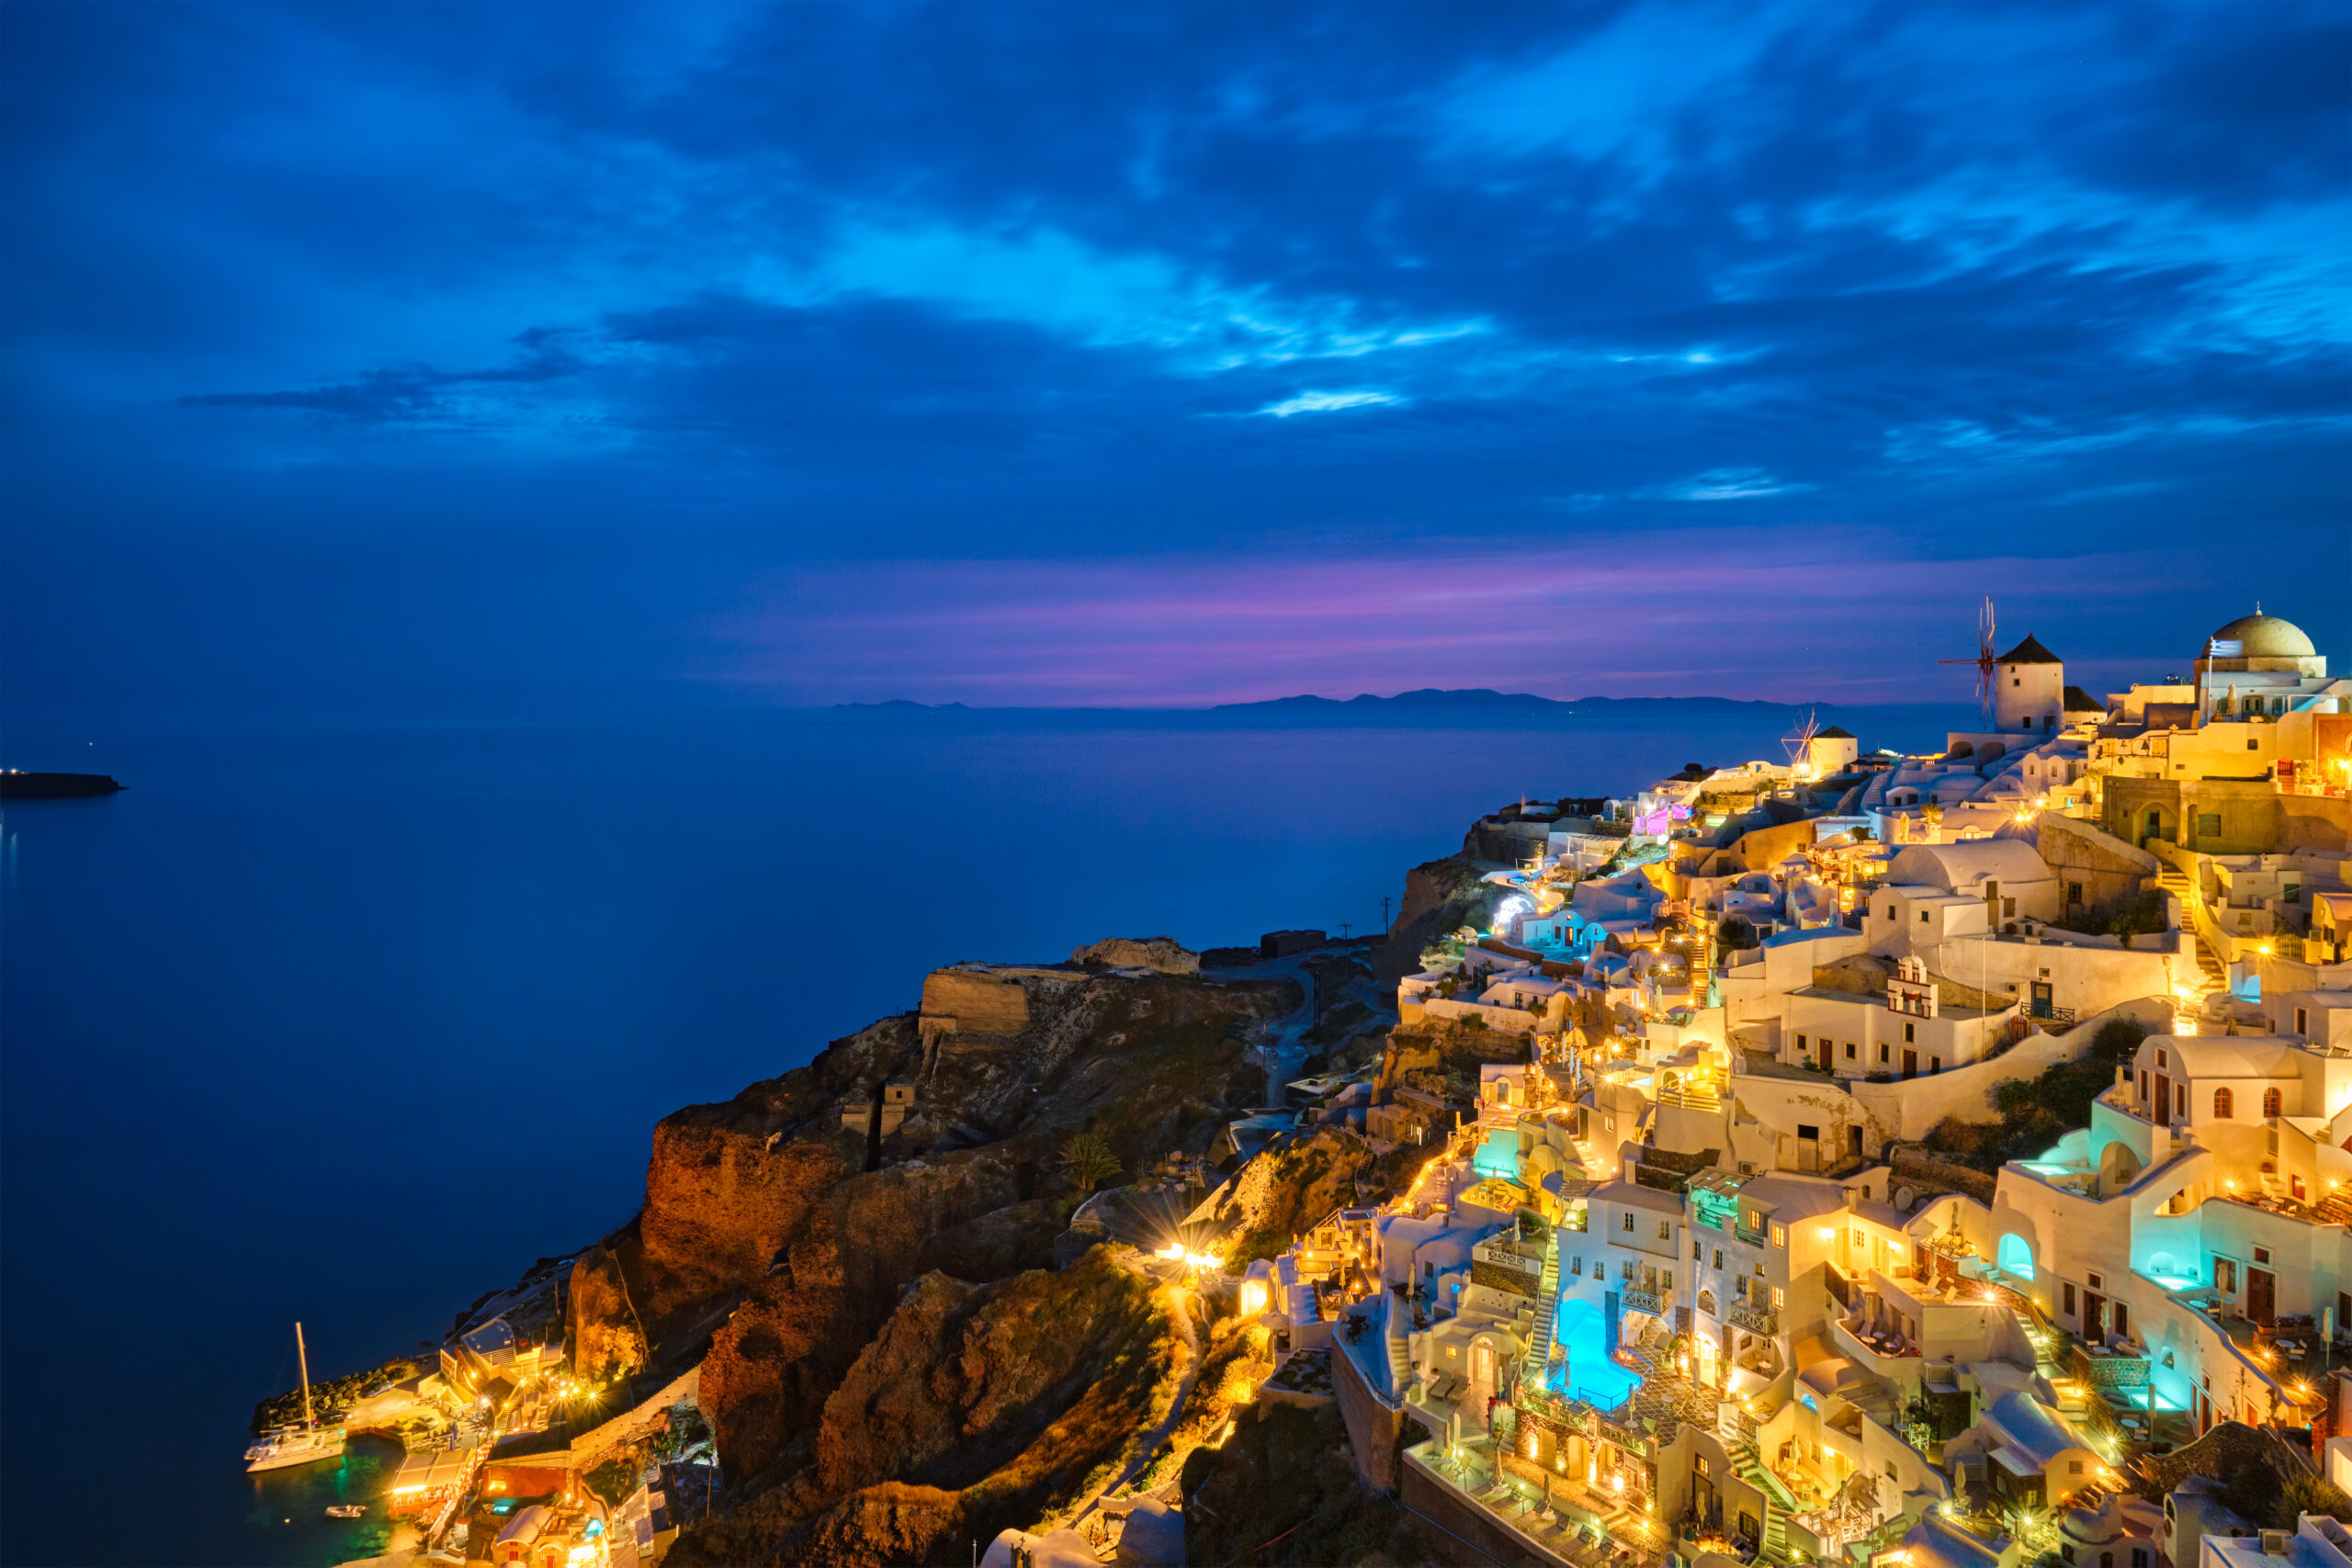 Photo of Santorini at night, with the houses lit up on the hill and the Mediterranean Sea in the background.